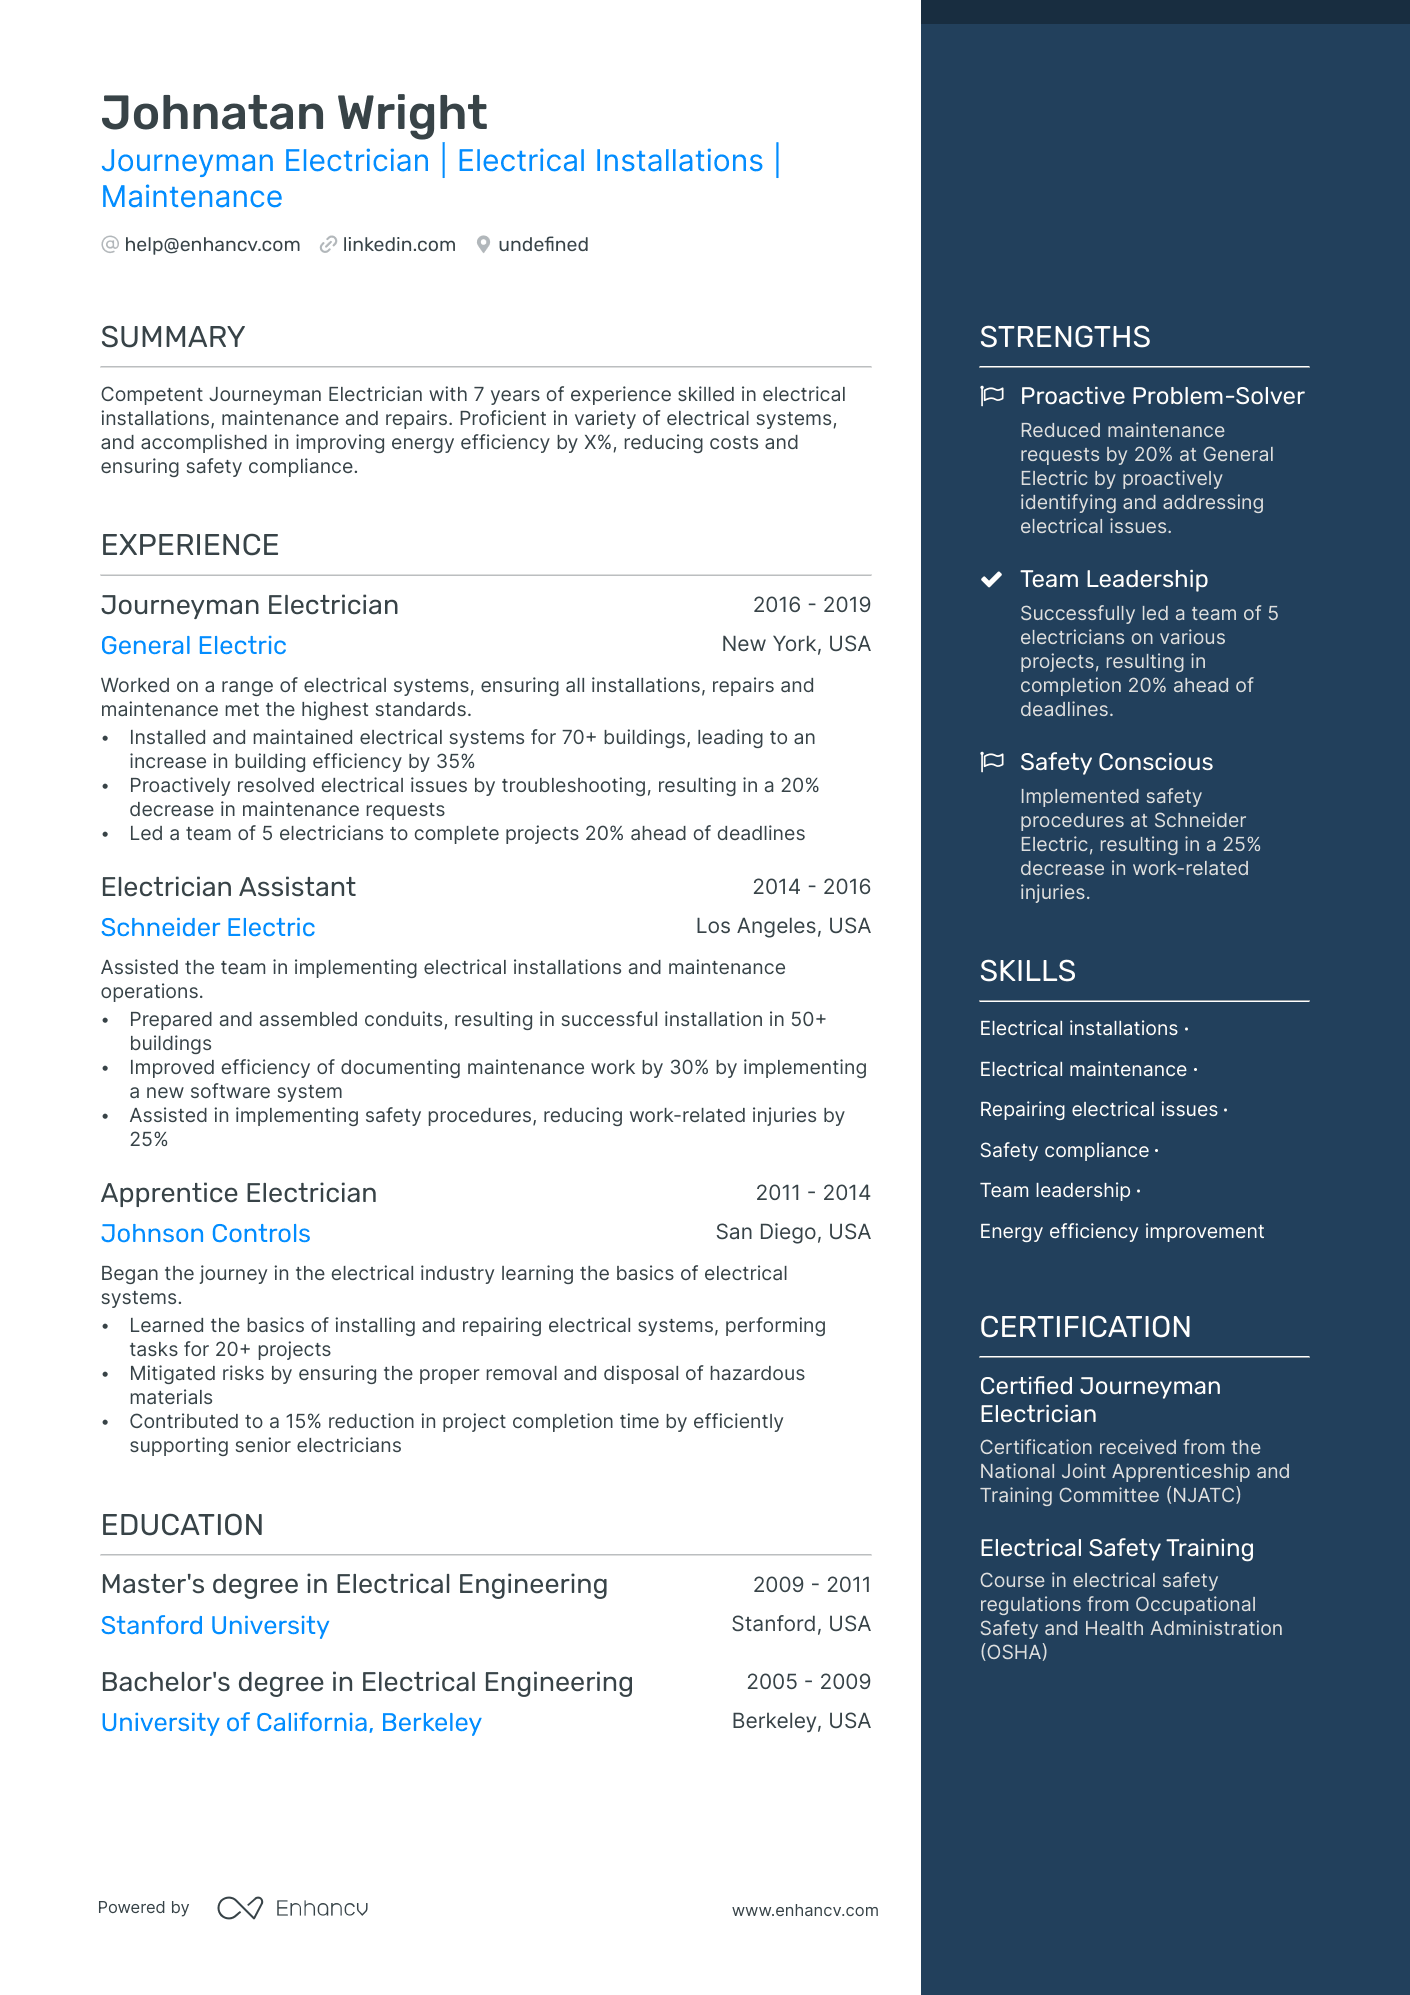 resume sample for applying electrician